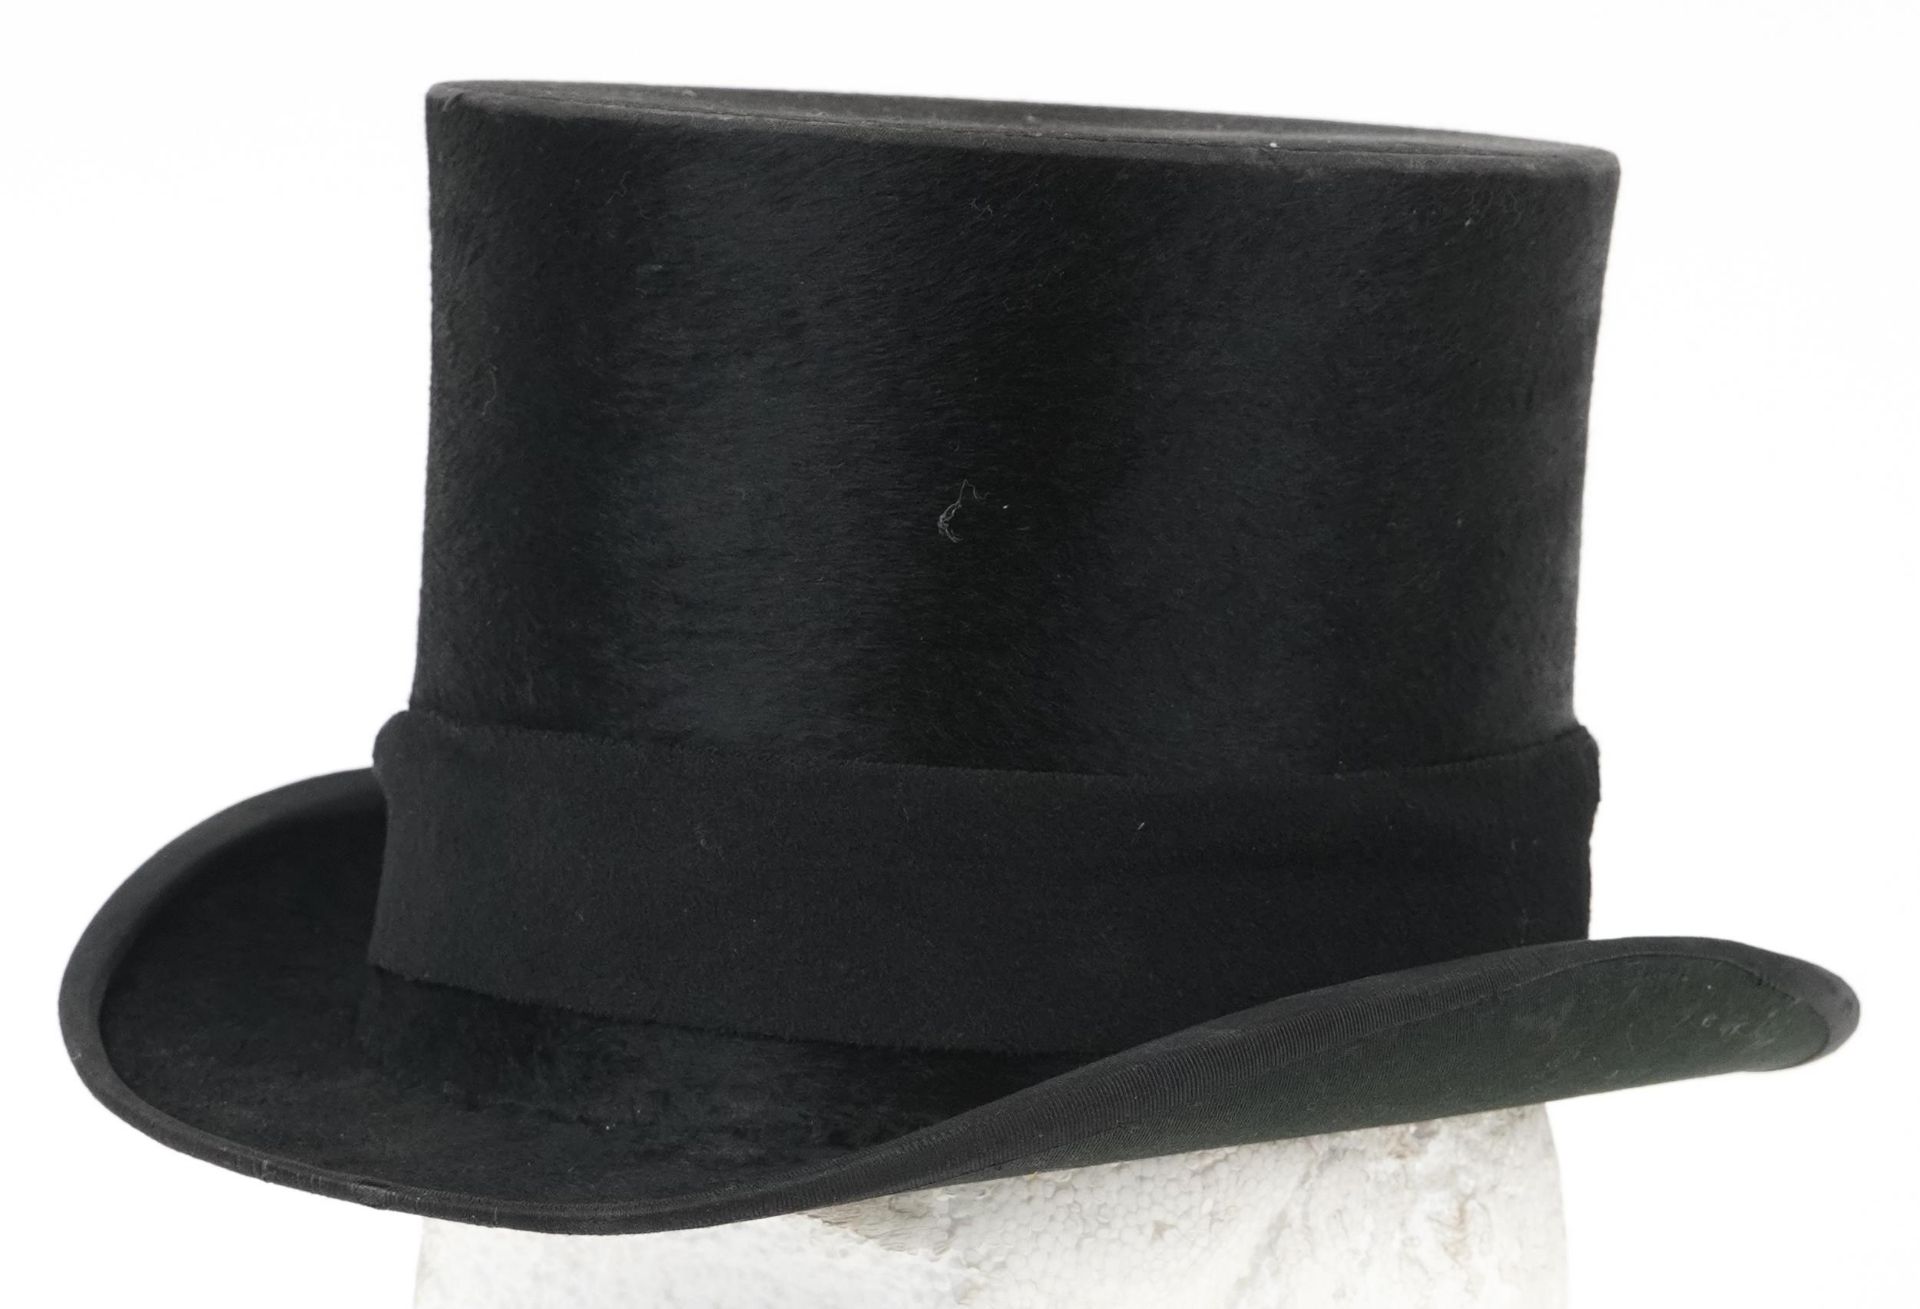 Dunn & Co of London moleskin top hat with box, size 7 - Image 2 of 4